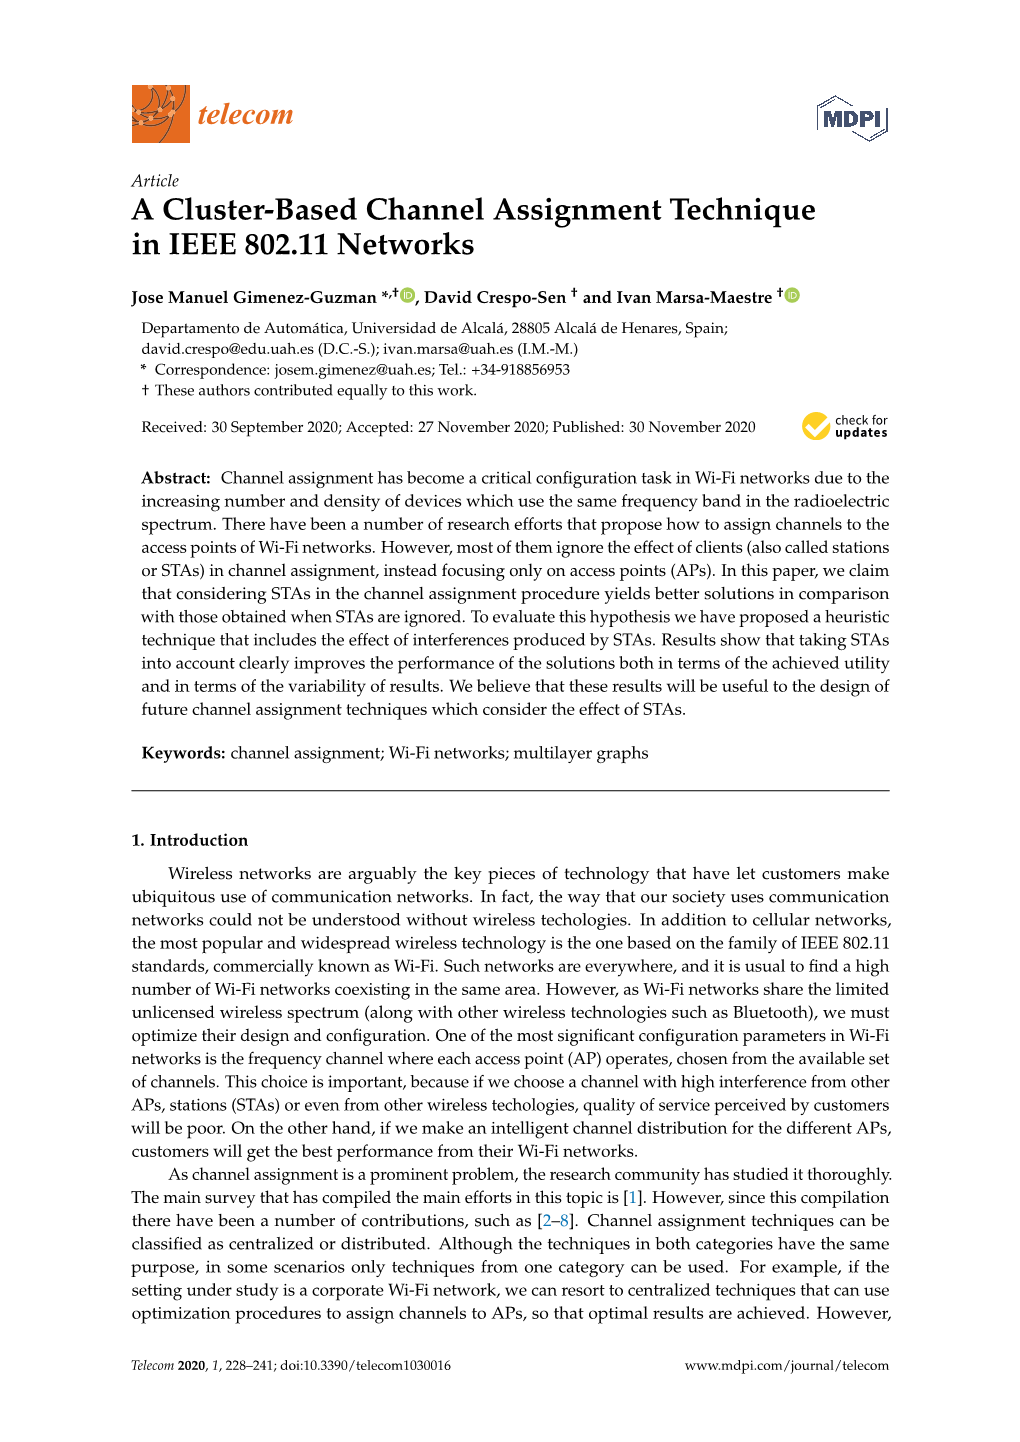 A Cluster-Based Channel Assignment Technique in IEEE 802.11 Networks